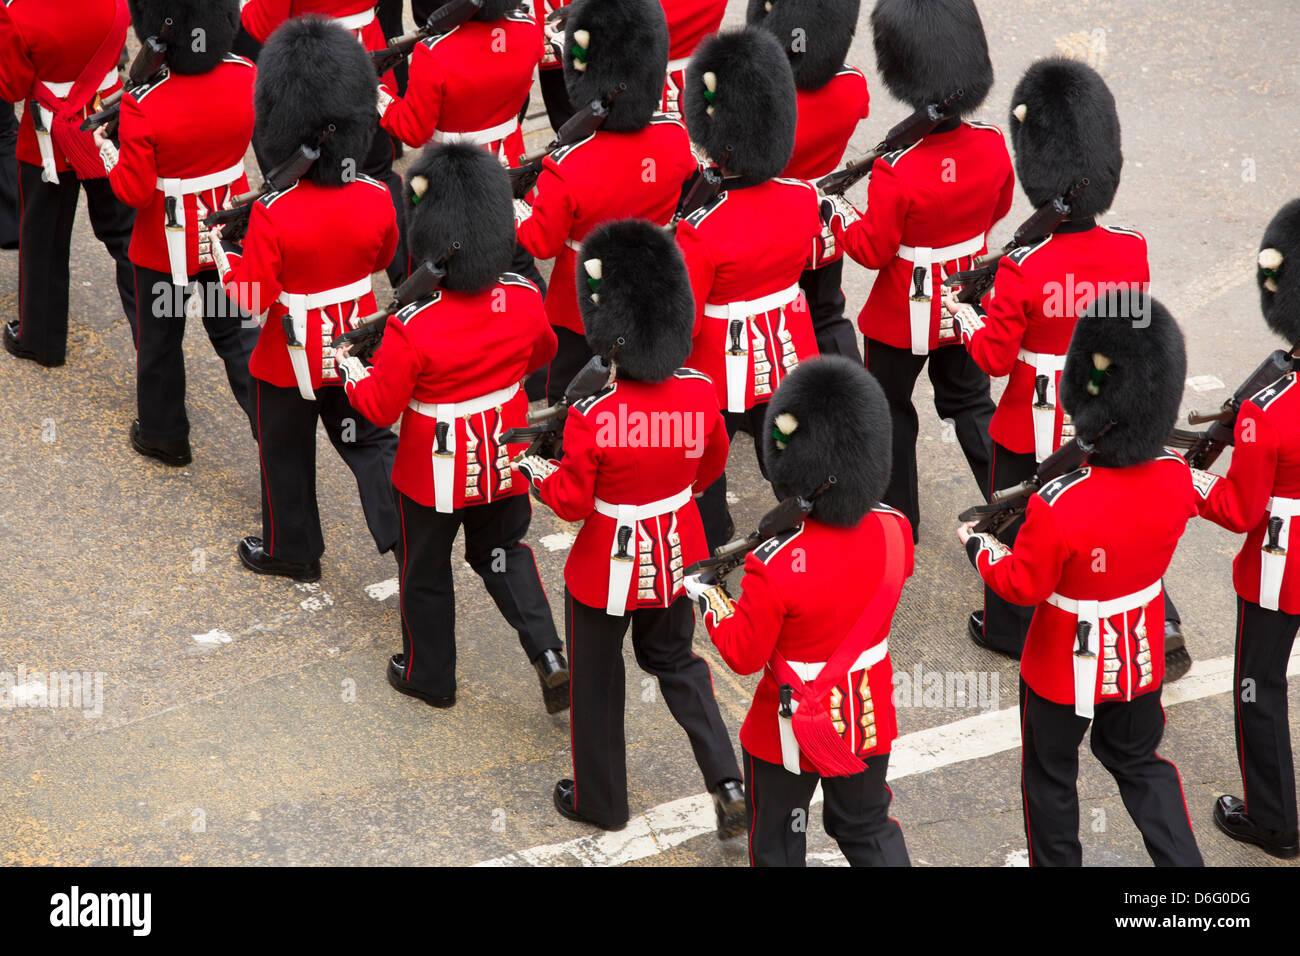 London, UK, 17 April 2013. Soldiers march at the funeral procession for Baroness Margaret Thatcher. Credit: Sarah Peters/Alamy Live News Stock Photo